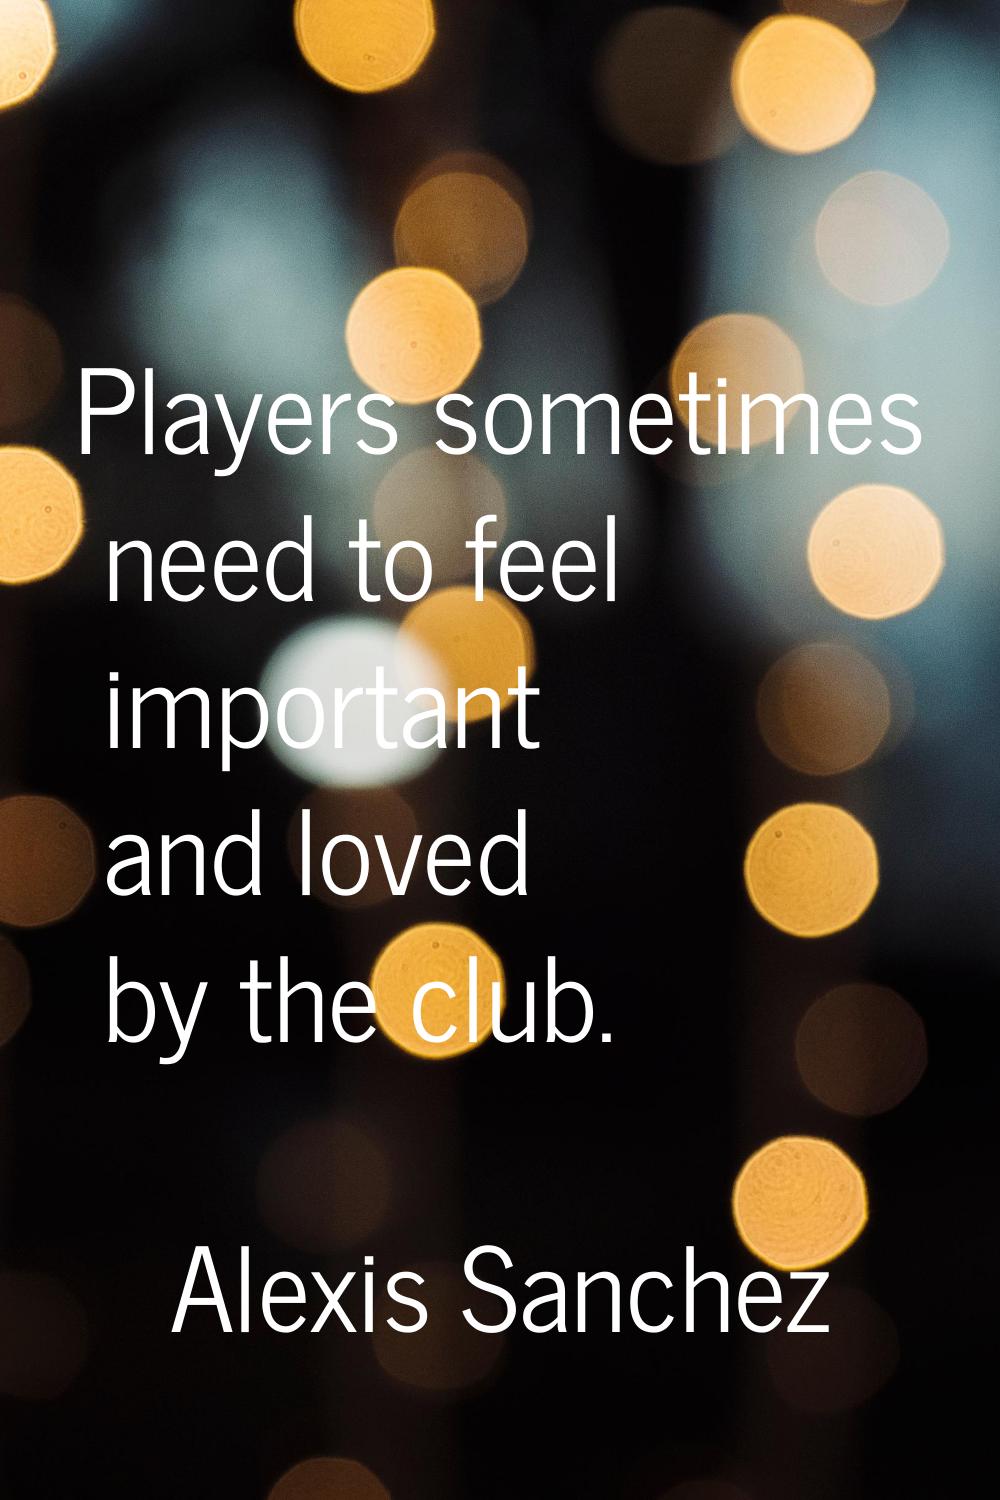 Players sometimes need to feel important and loved by the club.